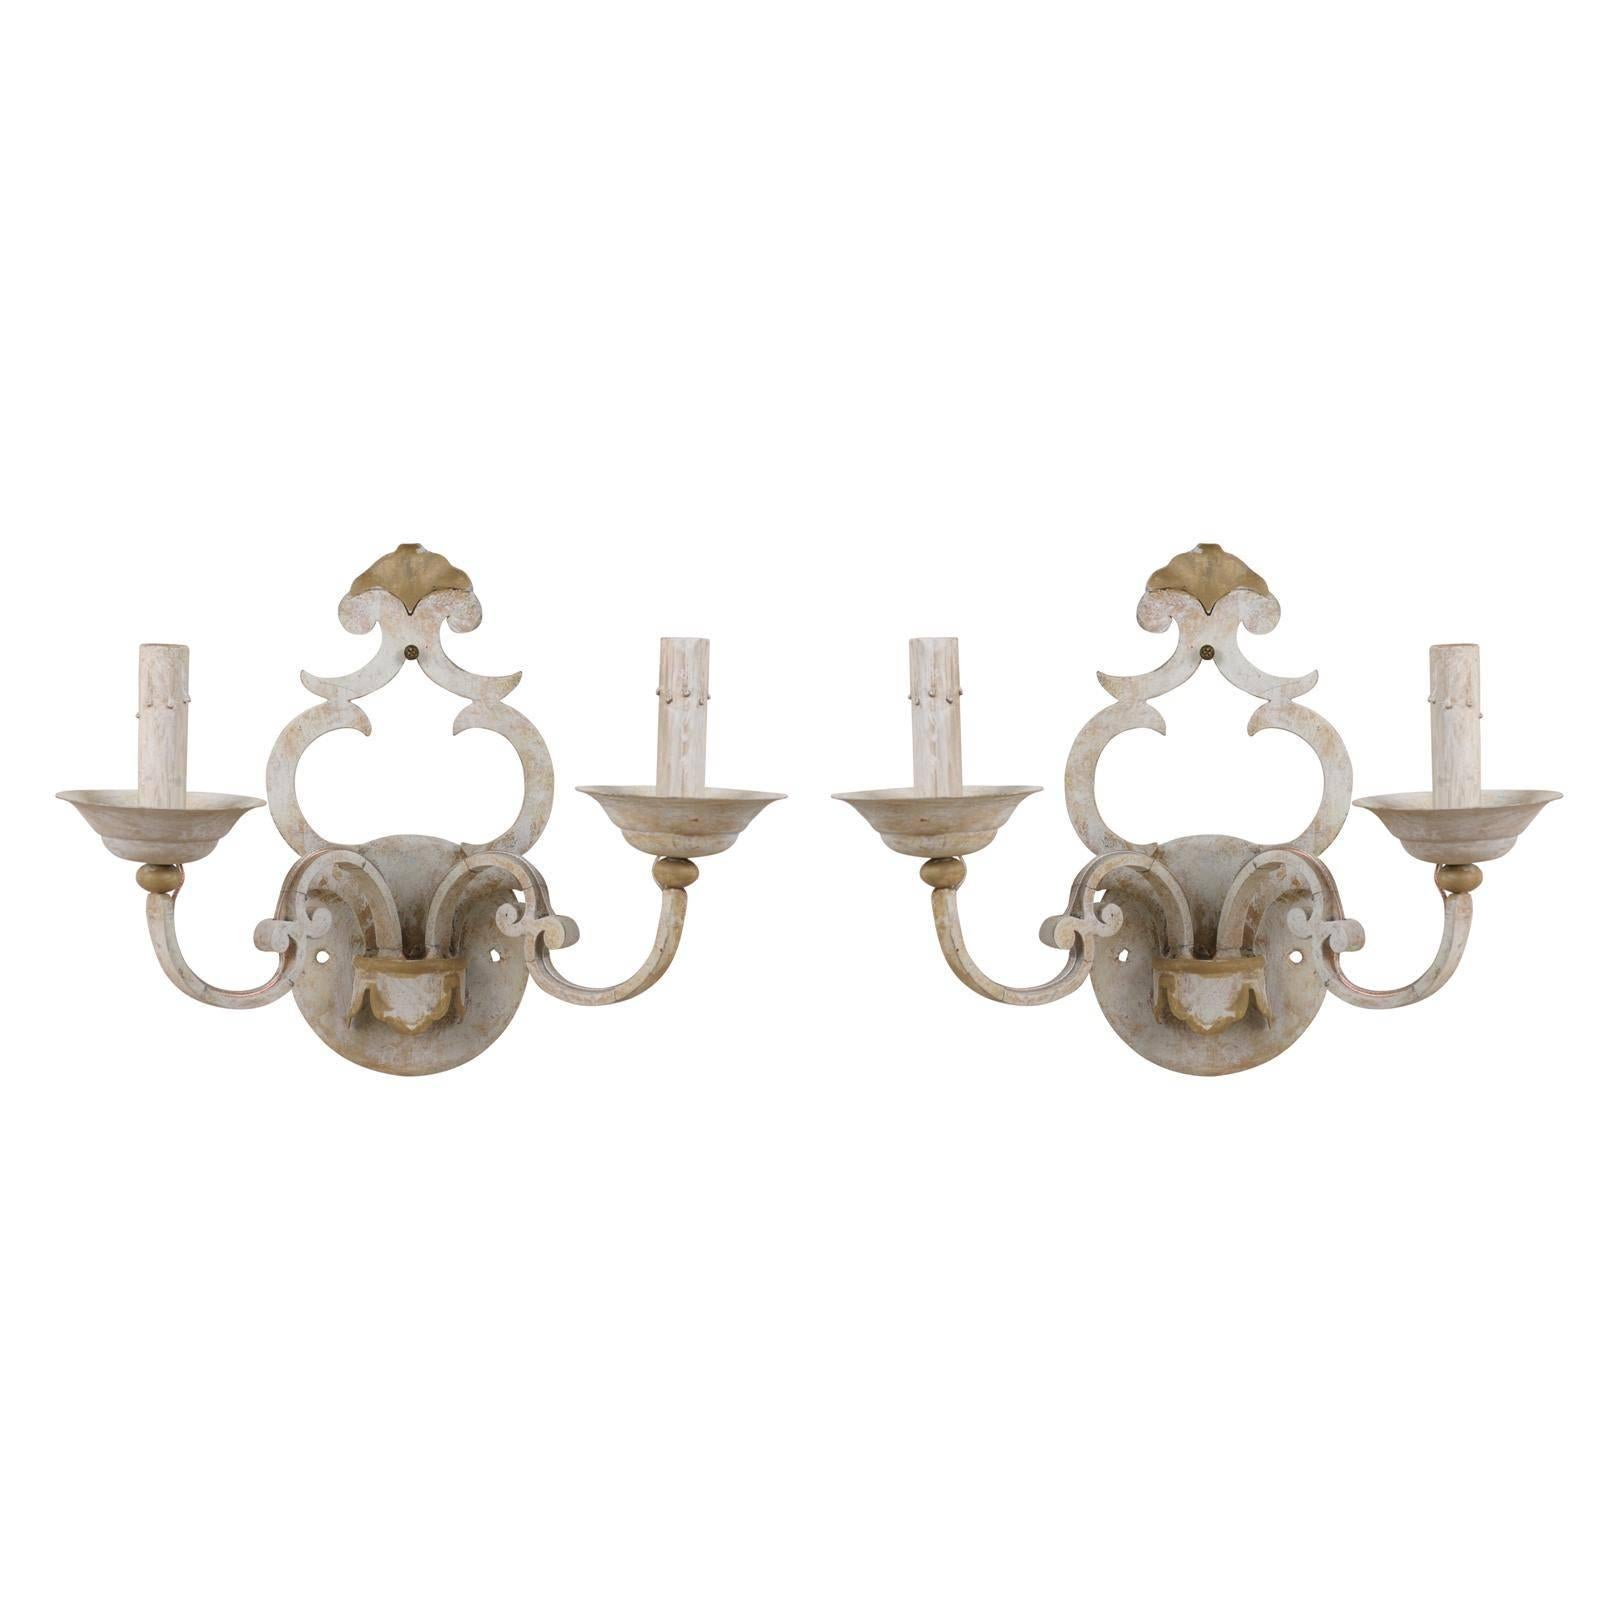 Pair of Two-Light Painted Metal Sconces